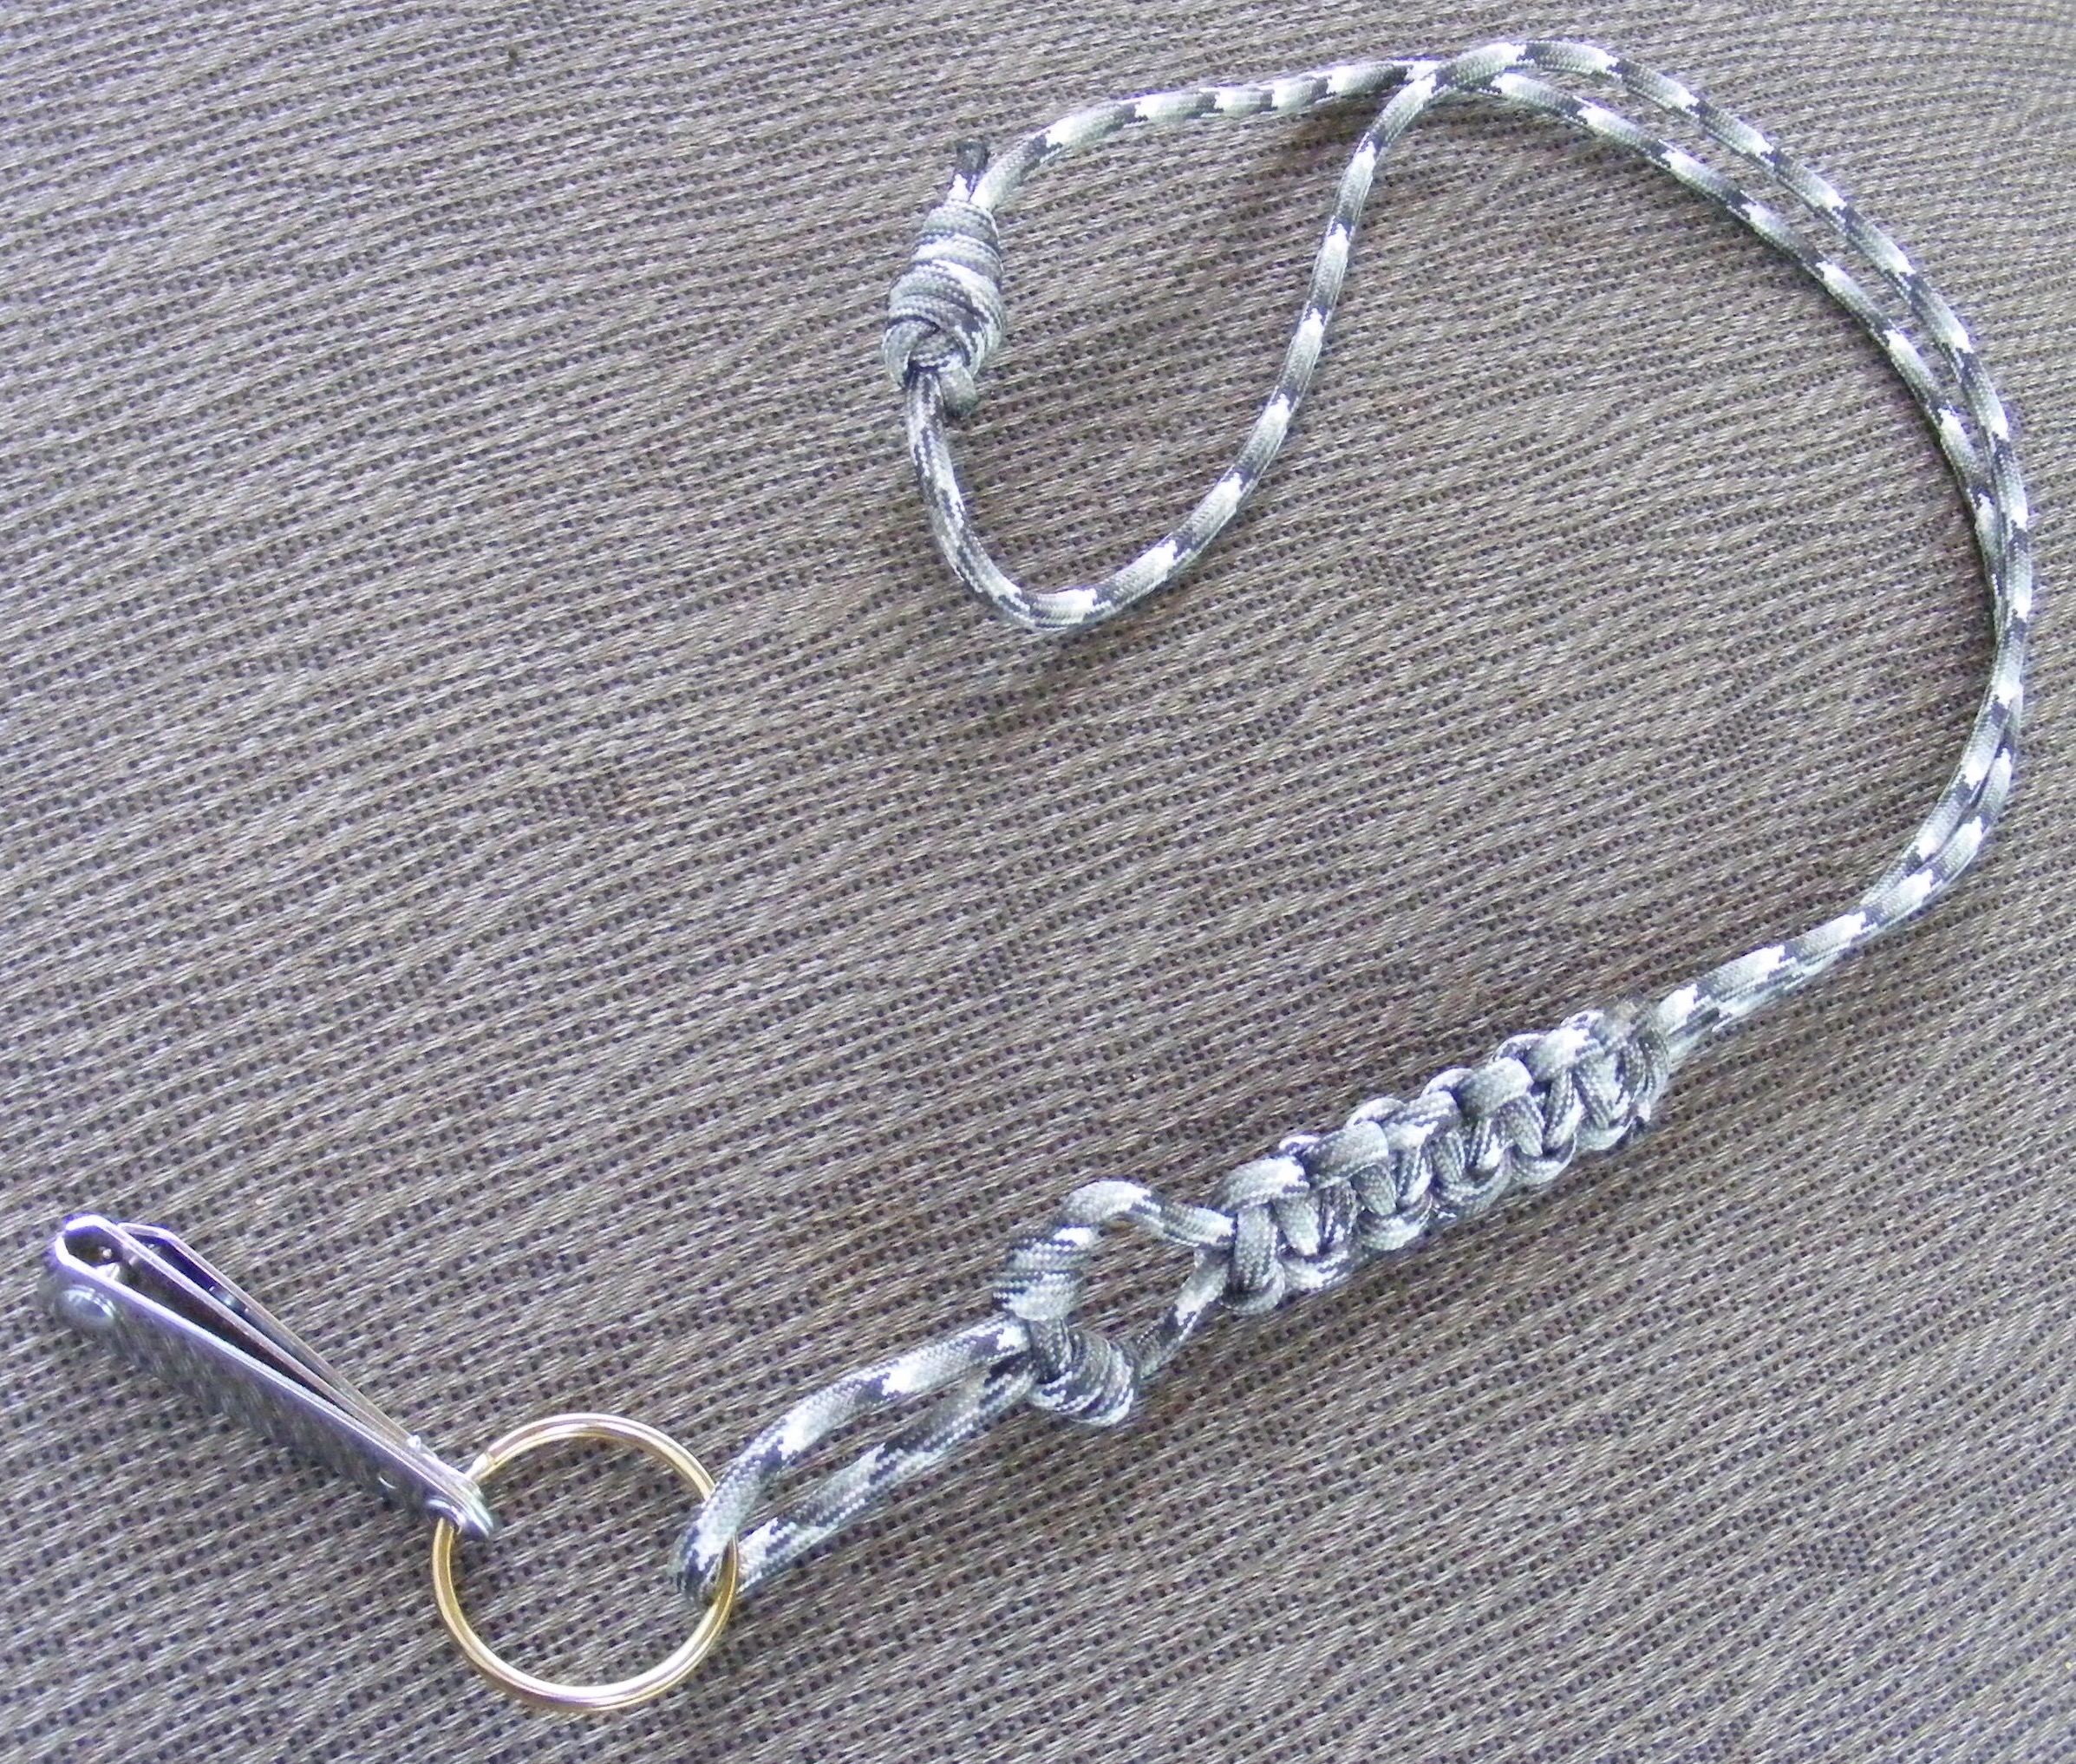 How to Make a Paracord Fisherman's Lanyard